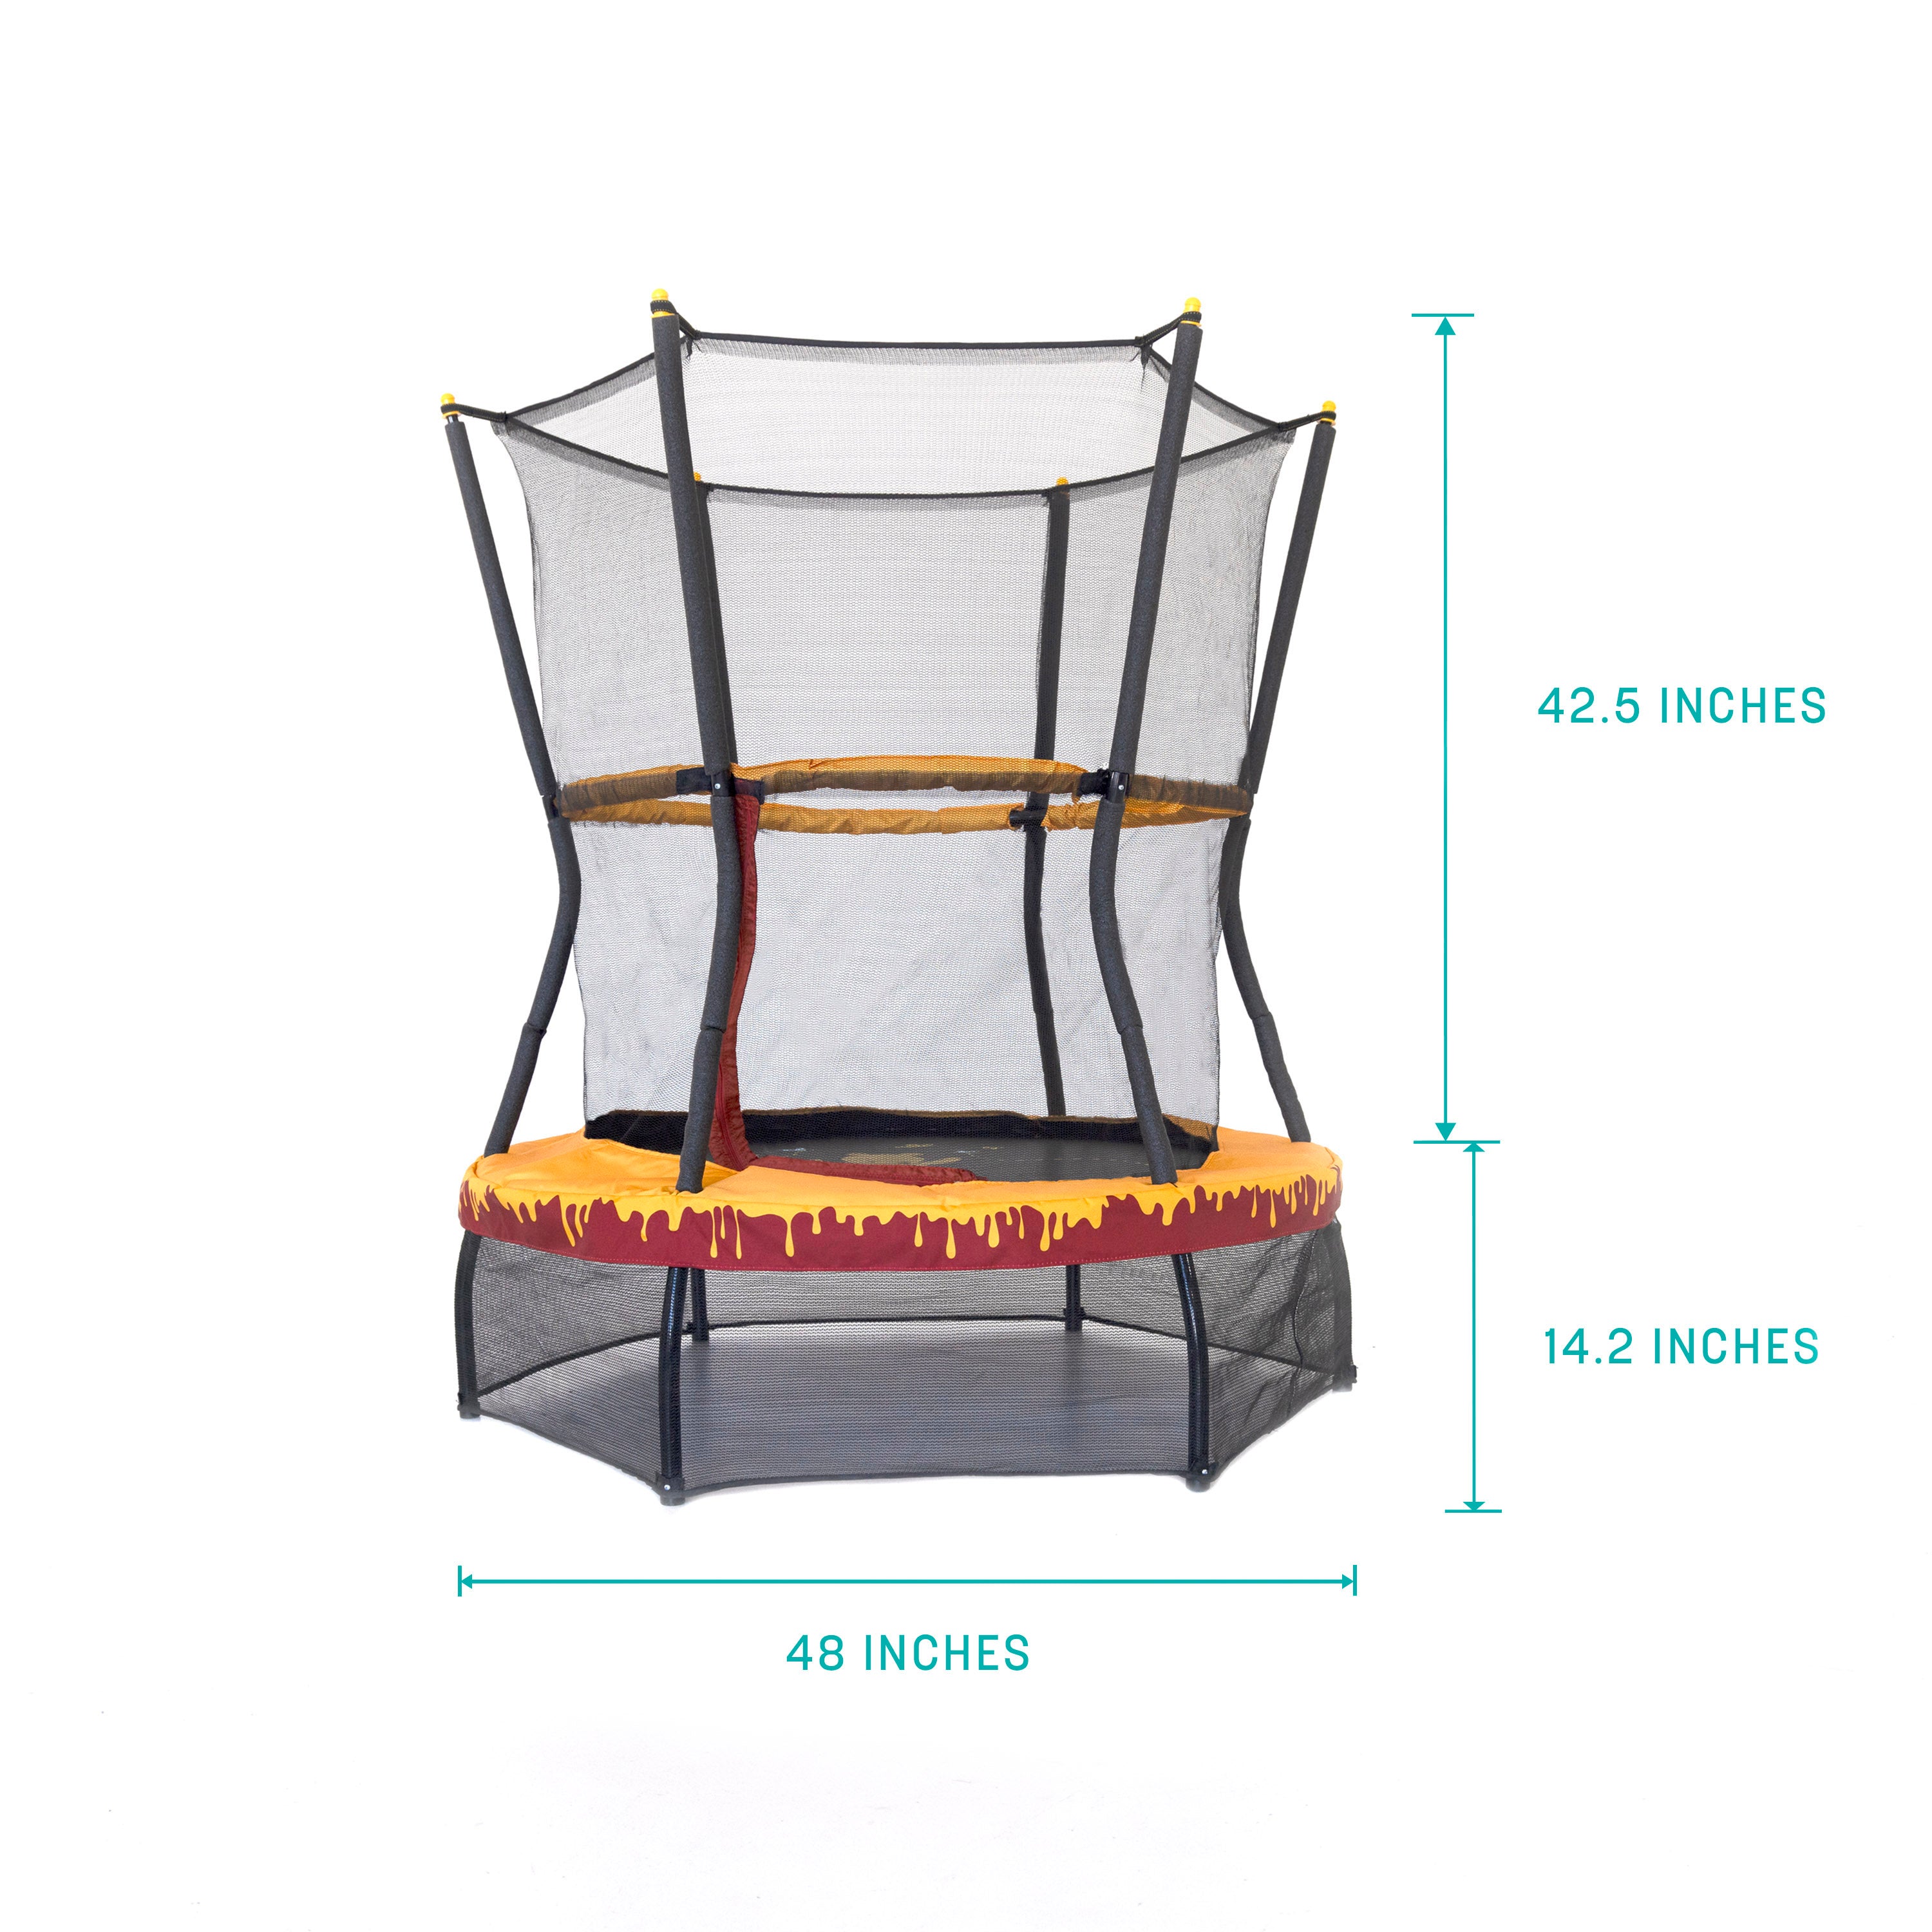 The Winnie the Pooh trampoline is 48” wide, 14.2” from the ground to the jump mat, and 42.5” from the frame to the top of the enclosure. 